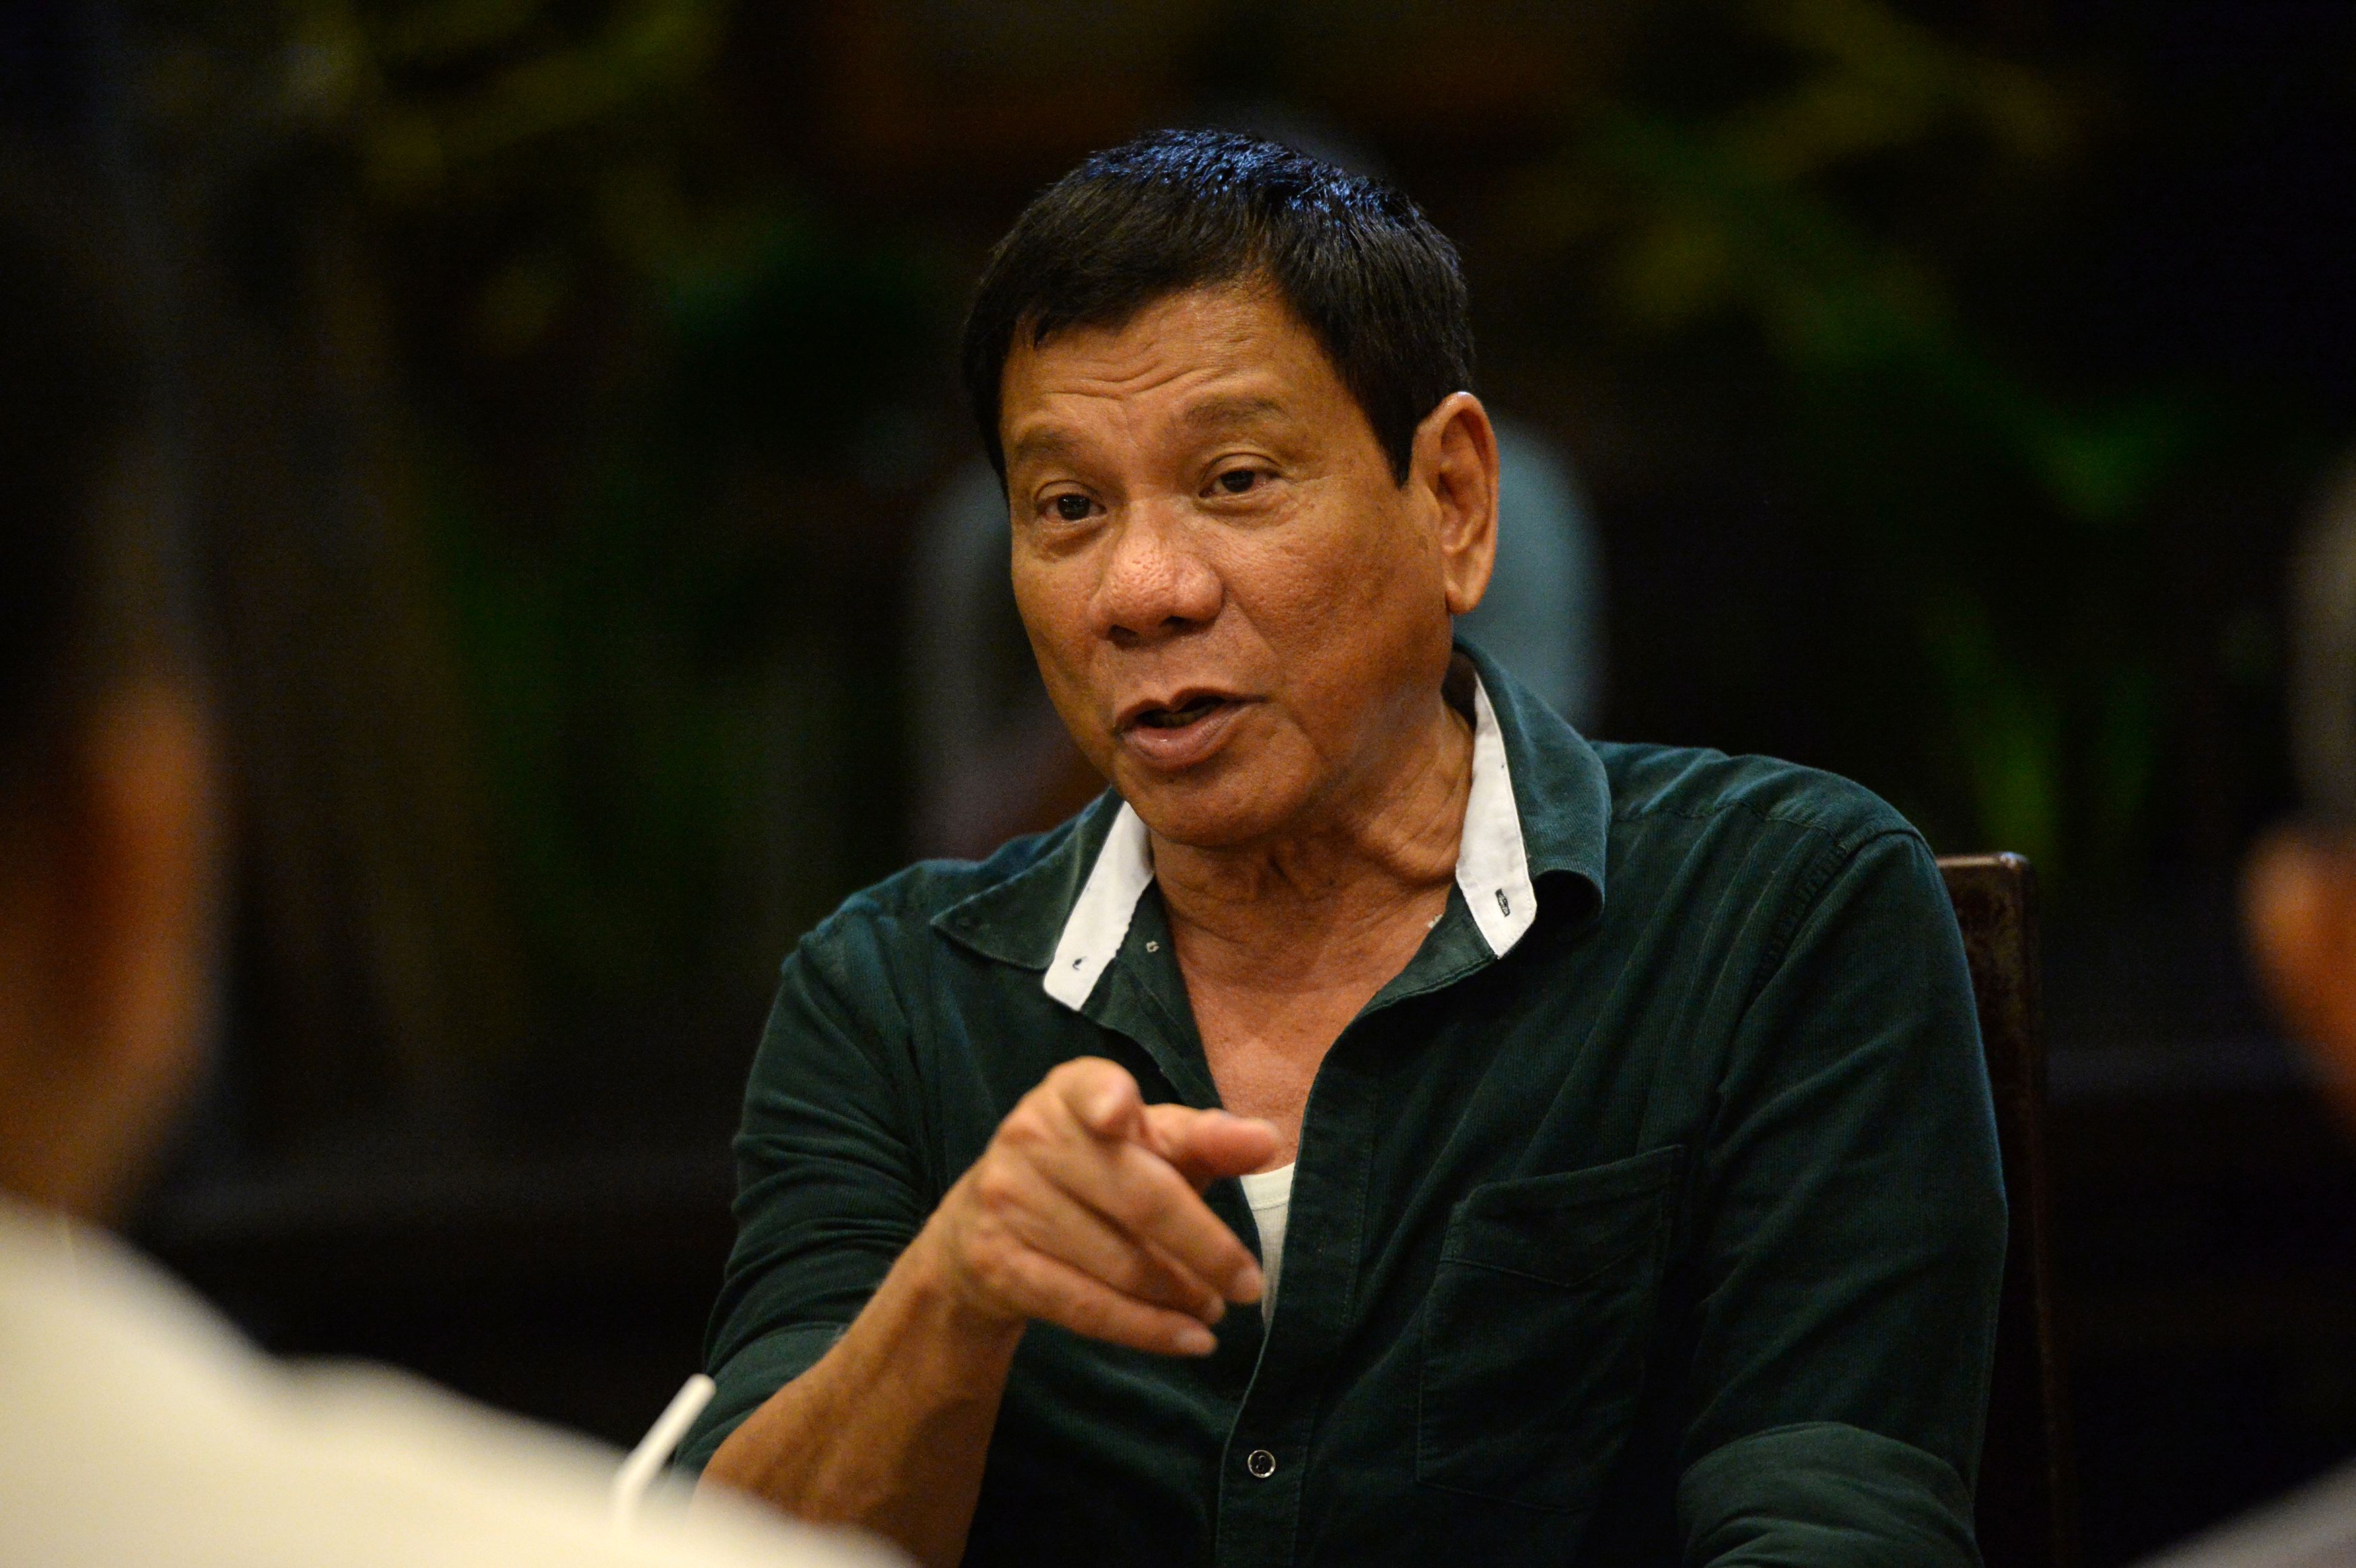 The Philippine President-elect Rodrigo Duterte during a meeting at a hotel in Davao City, in the Philippines' southern island of Mindanao, on May 15, 2016 (Ted Aljibe—AFP/Getty Images)